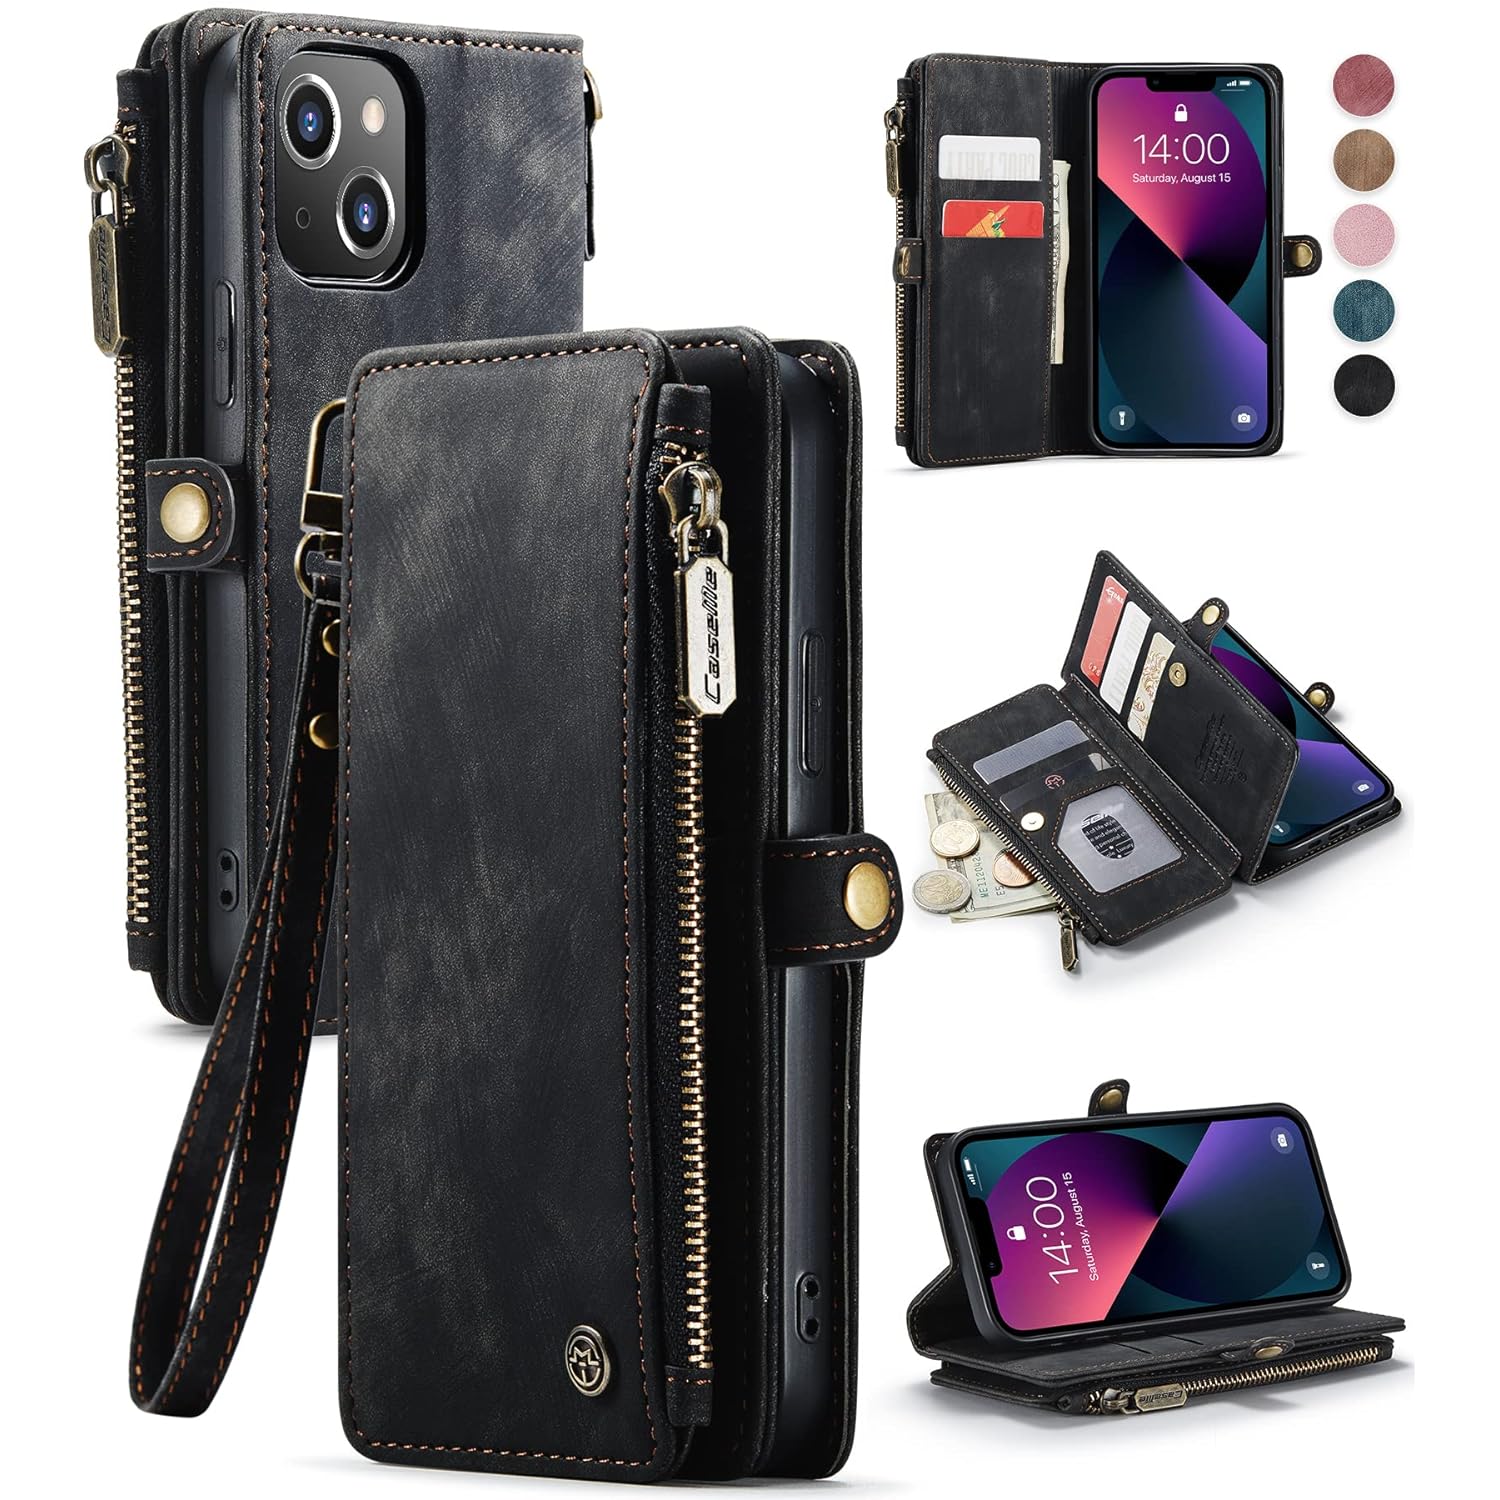 Zell Electronics Zell For Iphone 13 Case, Iphone 13 Case Wallet For Women Men, Fashion Durable Pu Leather Magnetic Flip Lanyard Strap Wristlet…